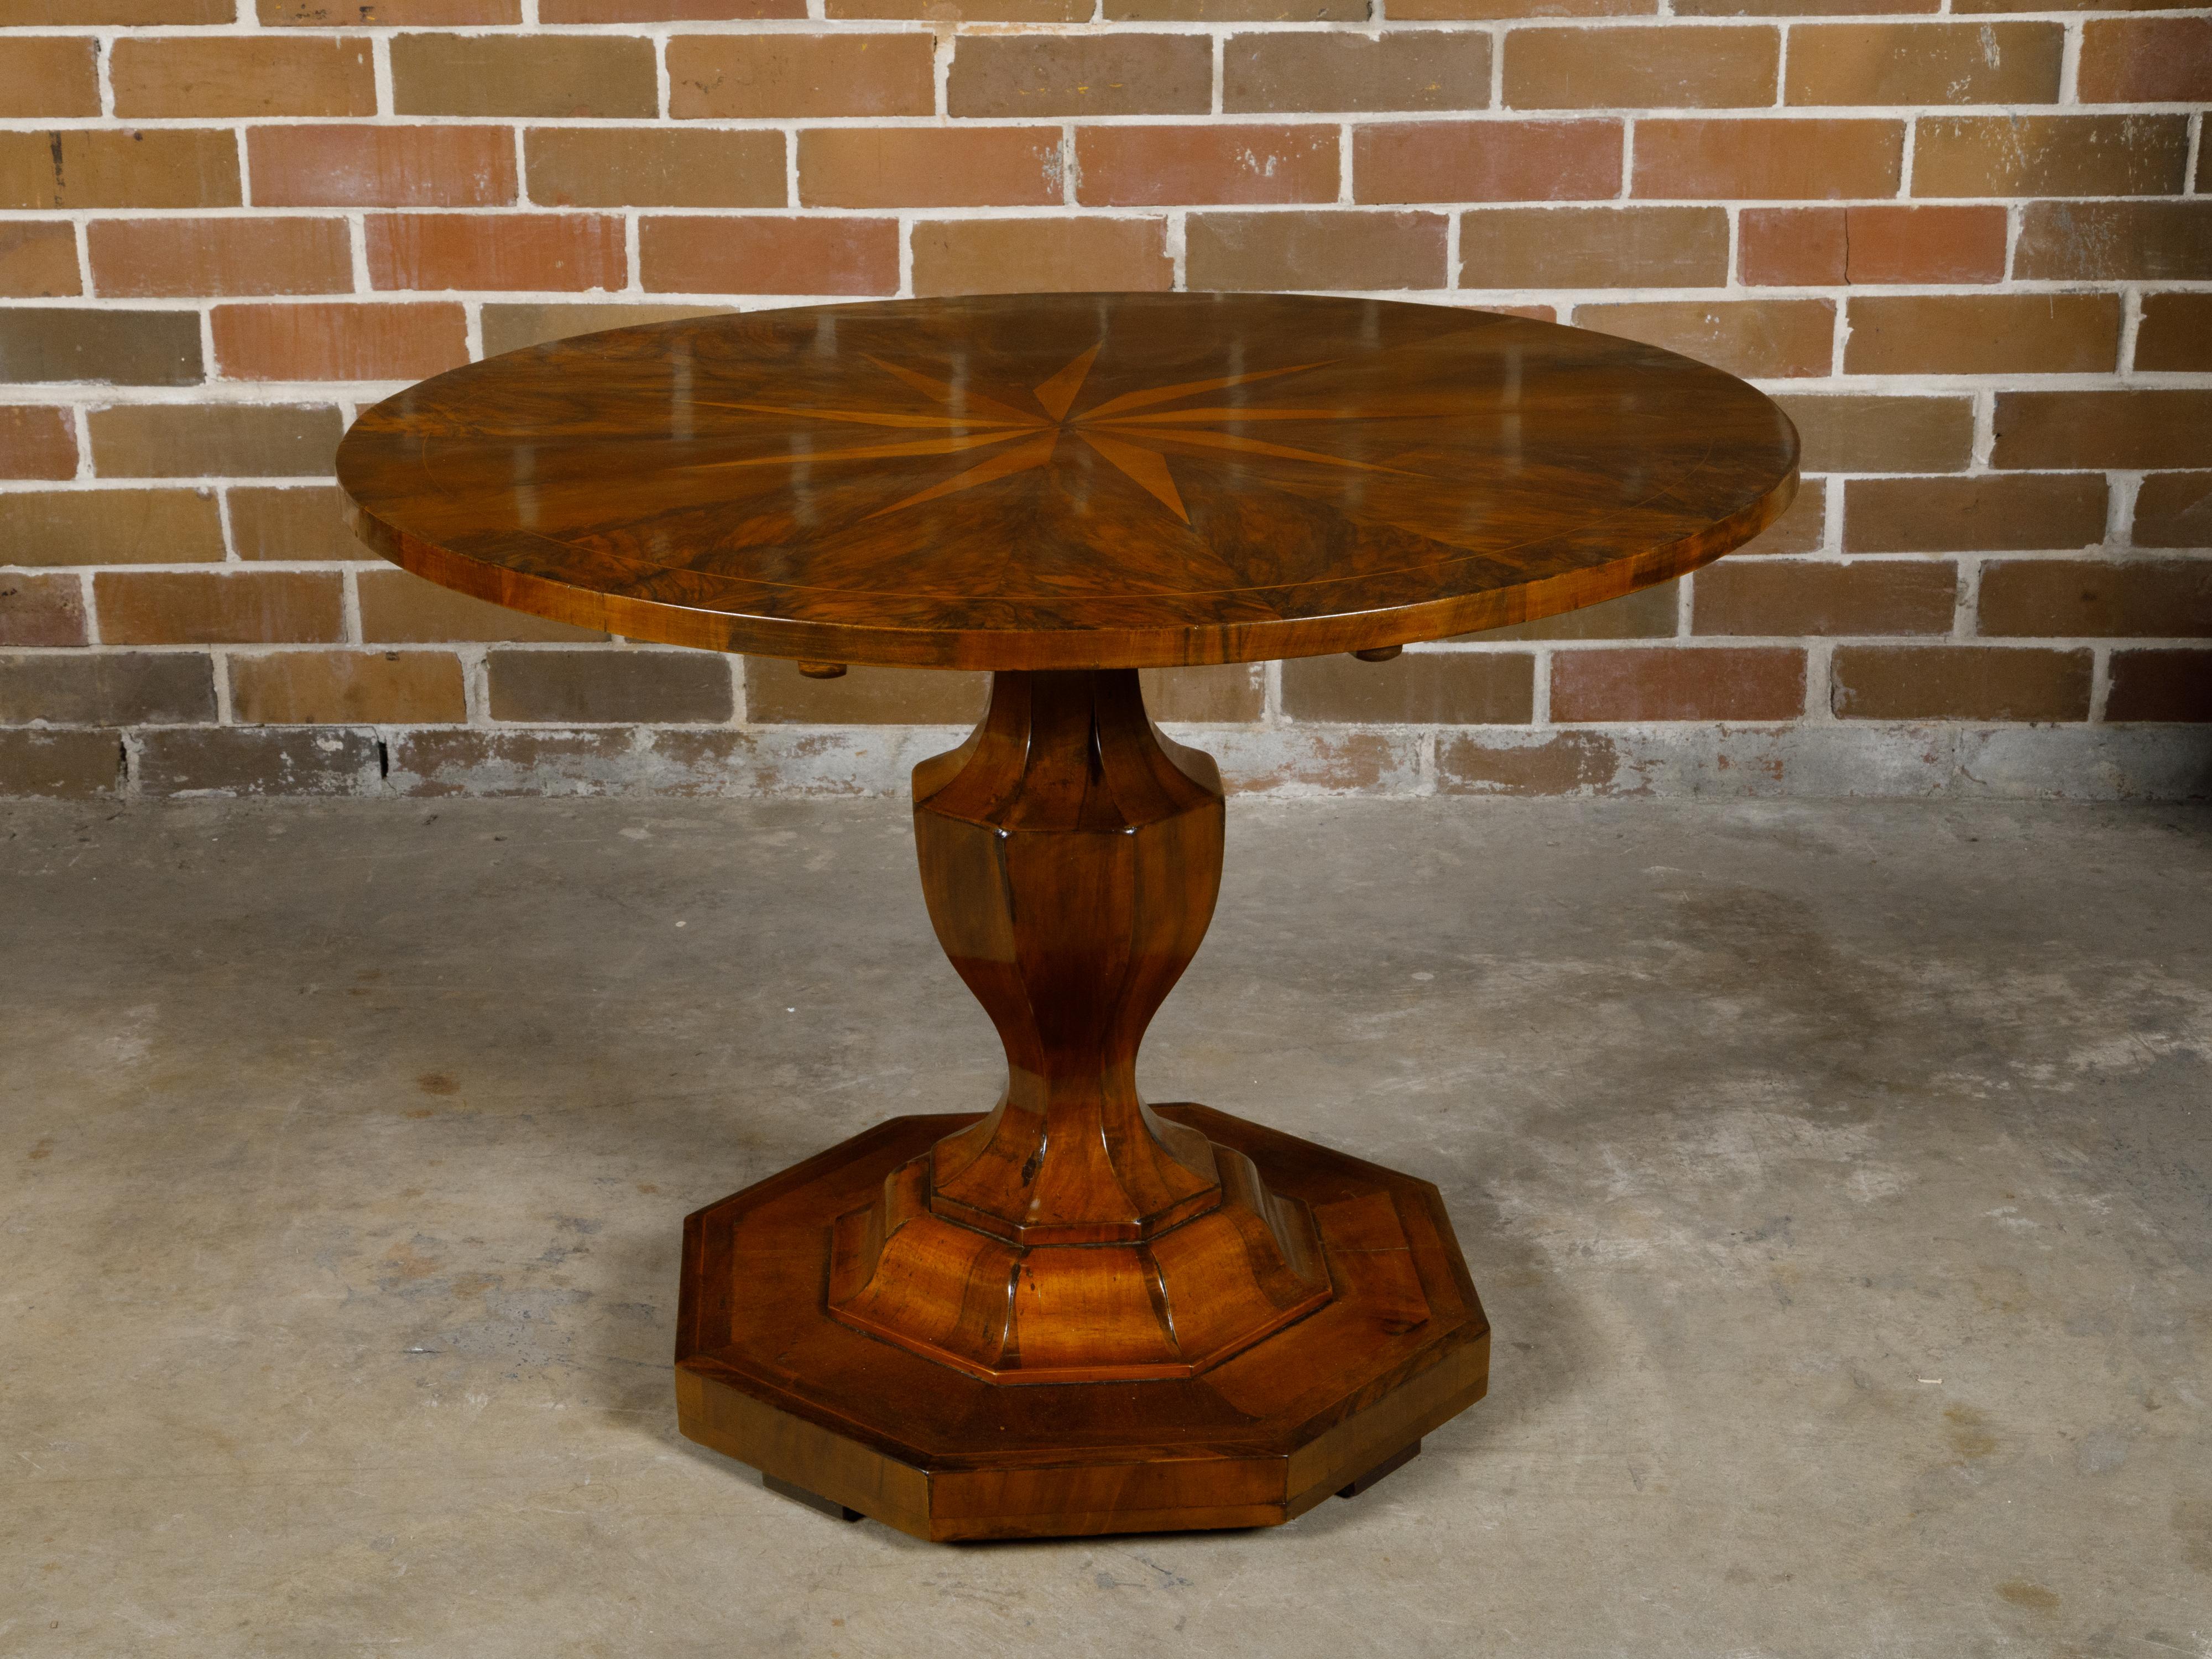 Biedermeier Period 19th Century Walnut Pedestal Table with Marquetry Top  For Sale 3